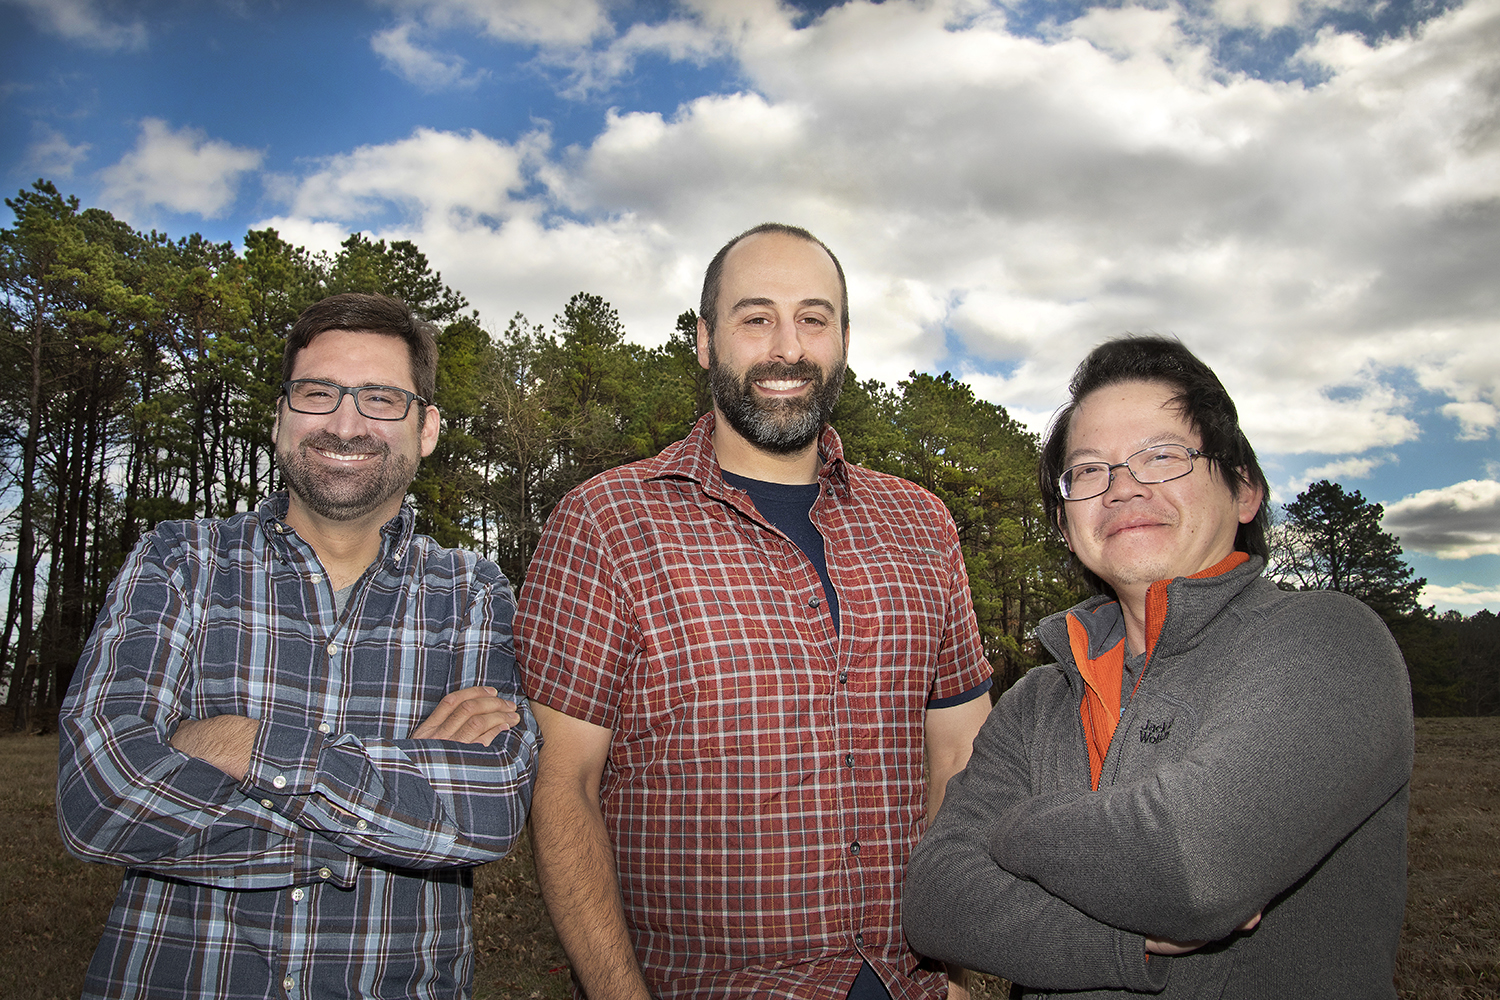 Chongai Kuang, pictured at the far right in pre-pandemic March 2020, worked with two Brookhaven colleagues to select a new site in the southeastern United States for the third ARM Mobile Facility (AMF-3). At left is associate ecologist Shawn Serbin. In the middle is meteorologist Scott Giangrande. Photo is courtesy of Brookhaven National Laboratory.